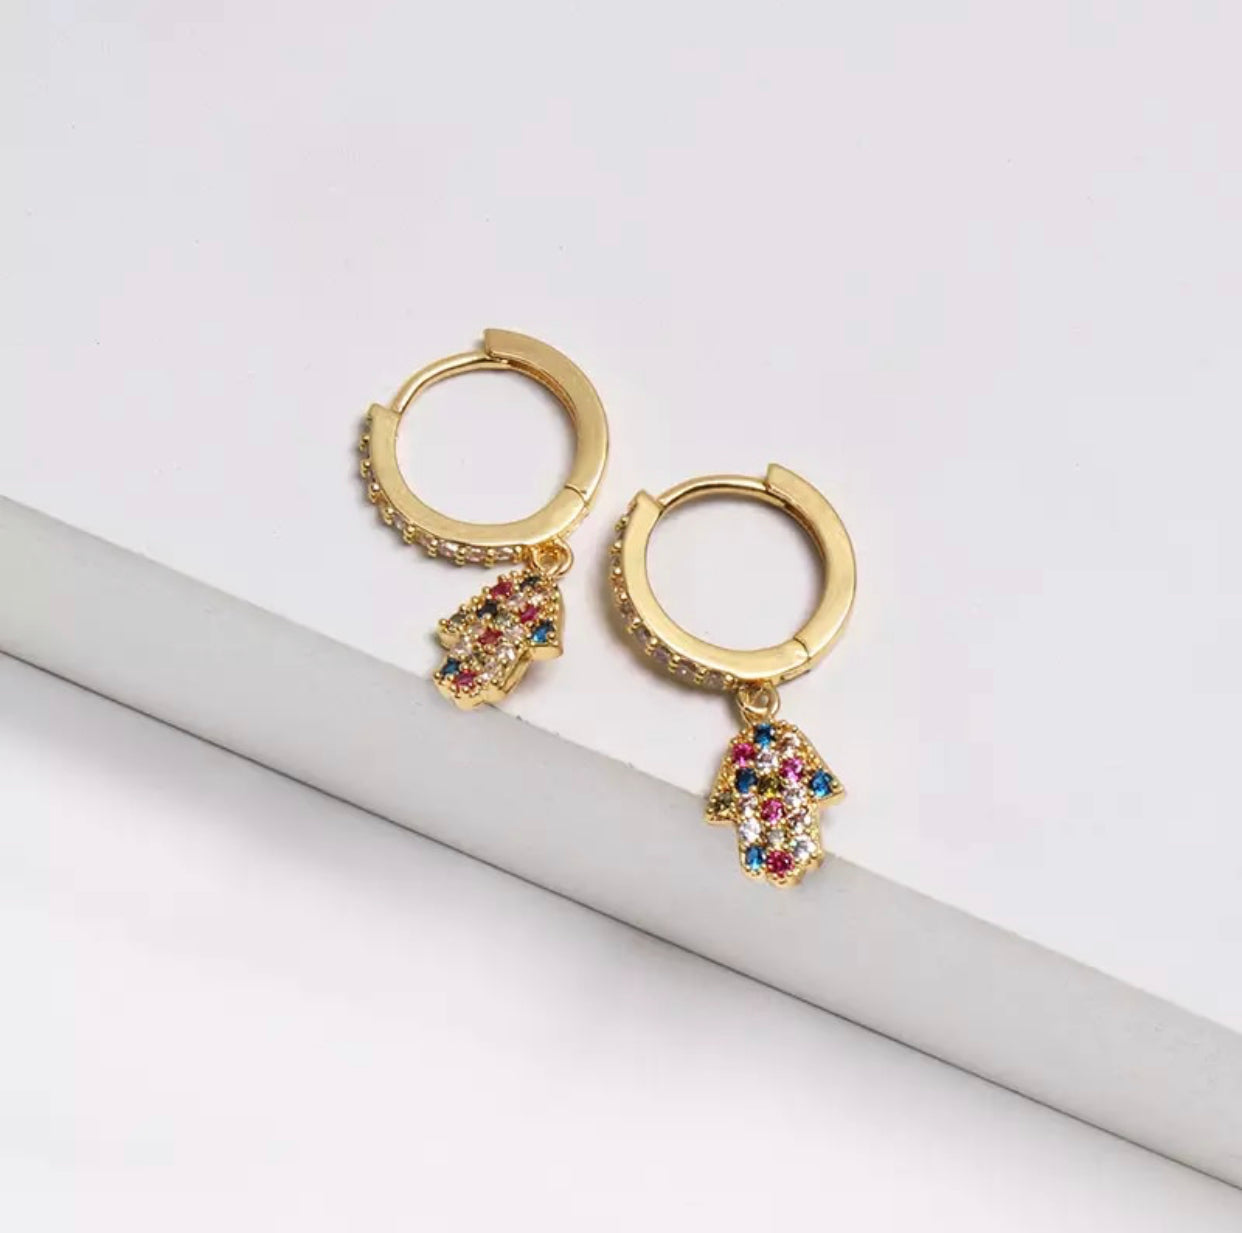 Gold Plated Hamsa Shape Earrings with Small Multicolored Pave in Hoop